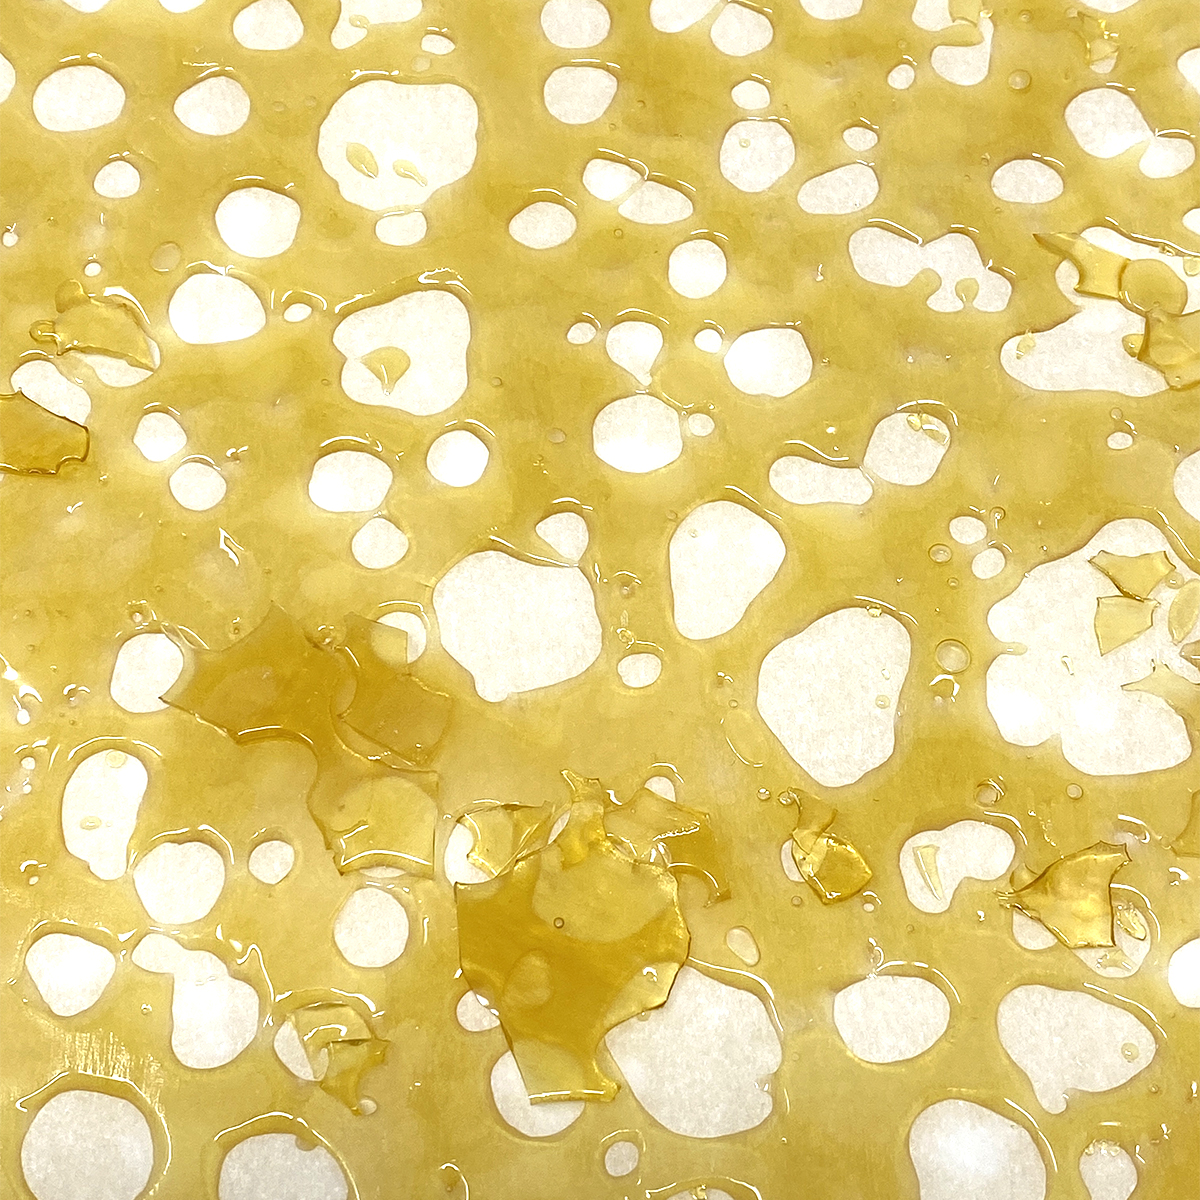 Shatter - Pink Tuna | Buy Shatter Online | Dispensary Near Me